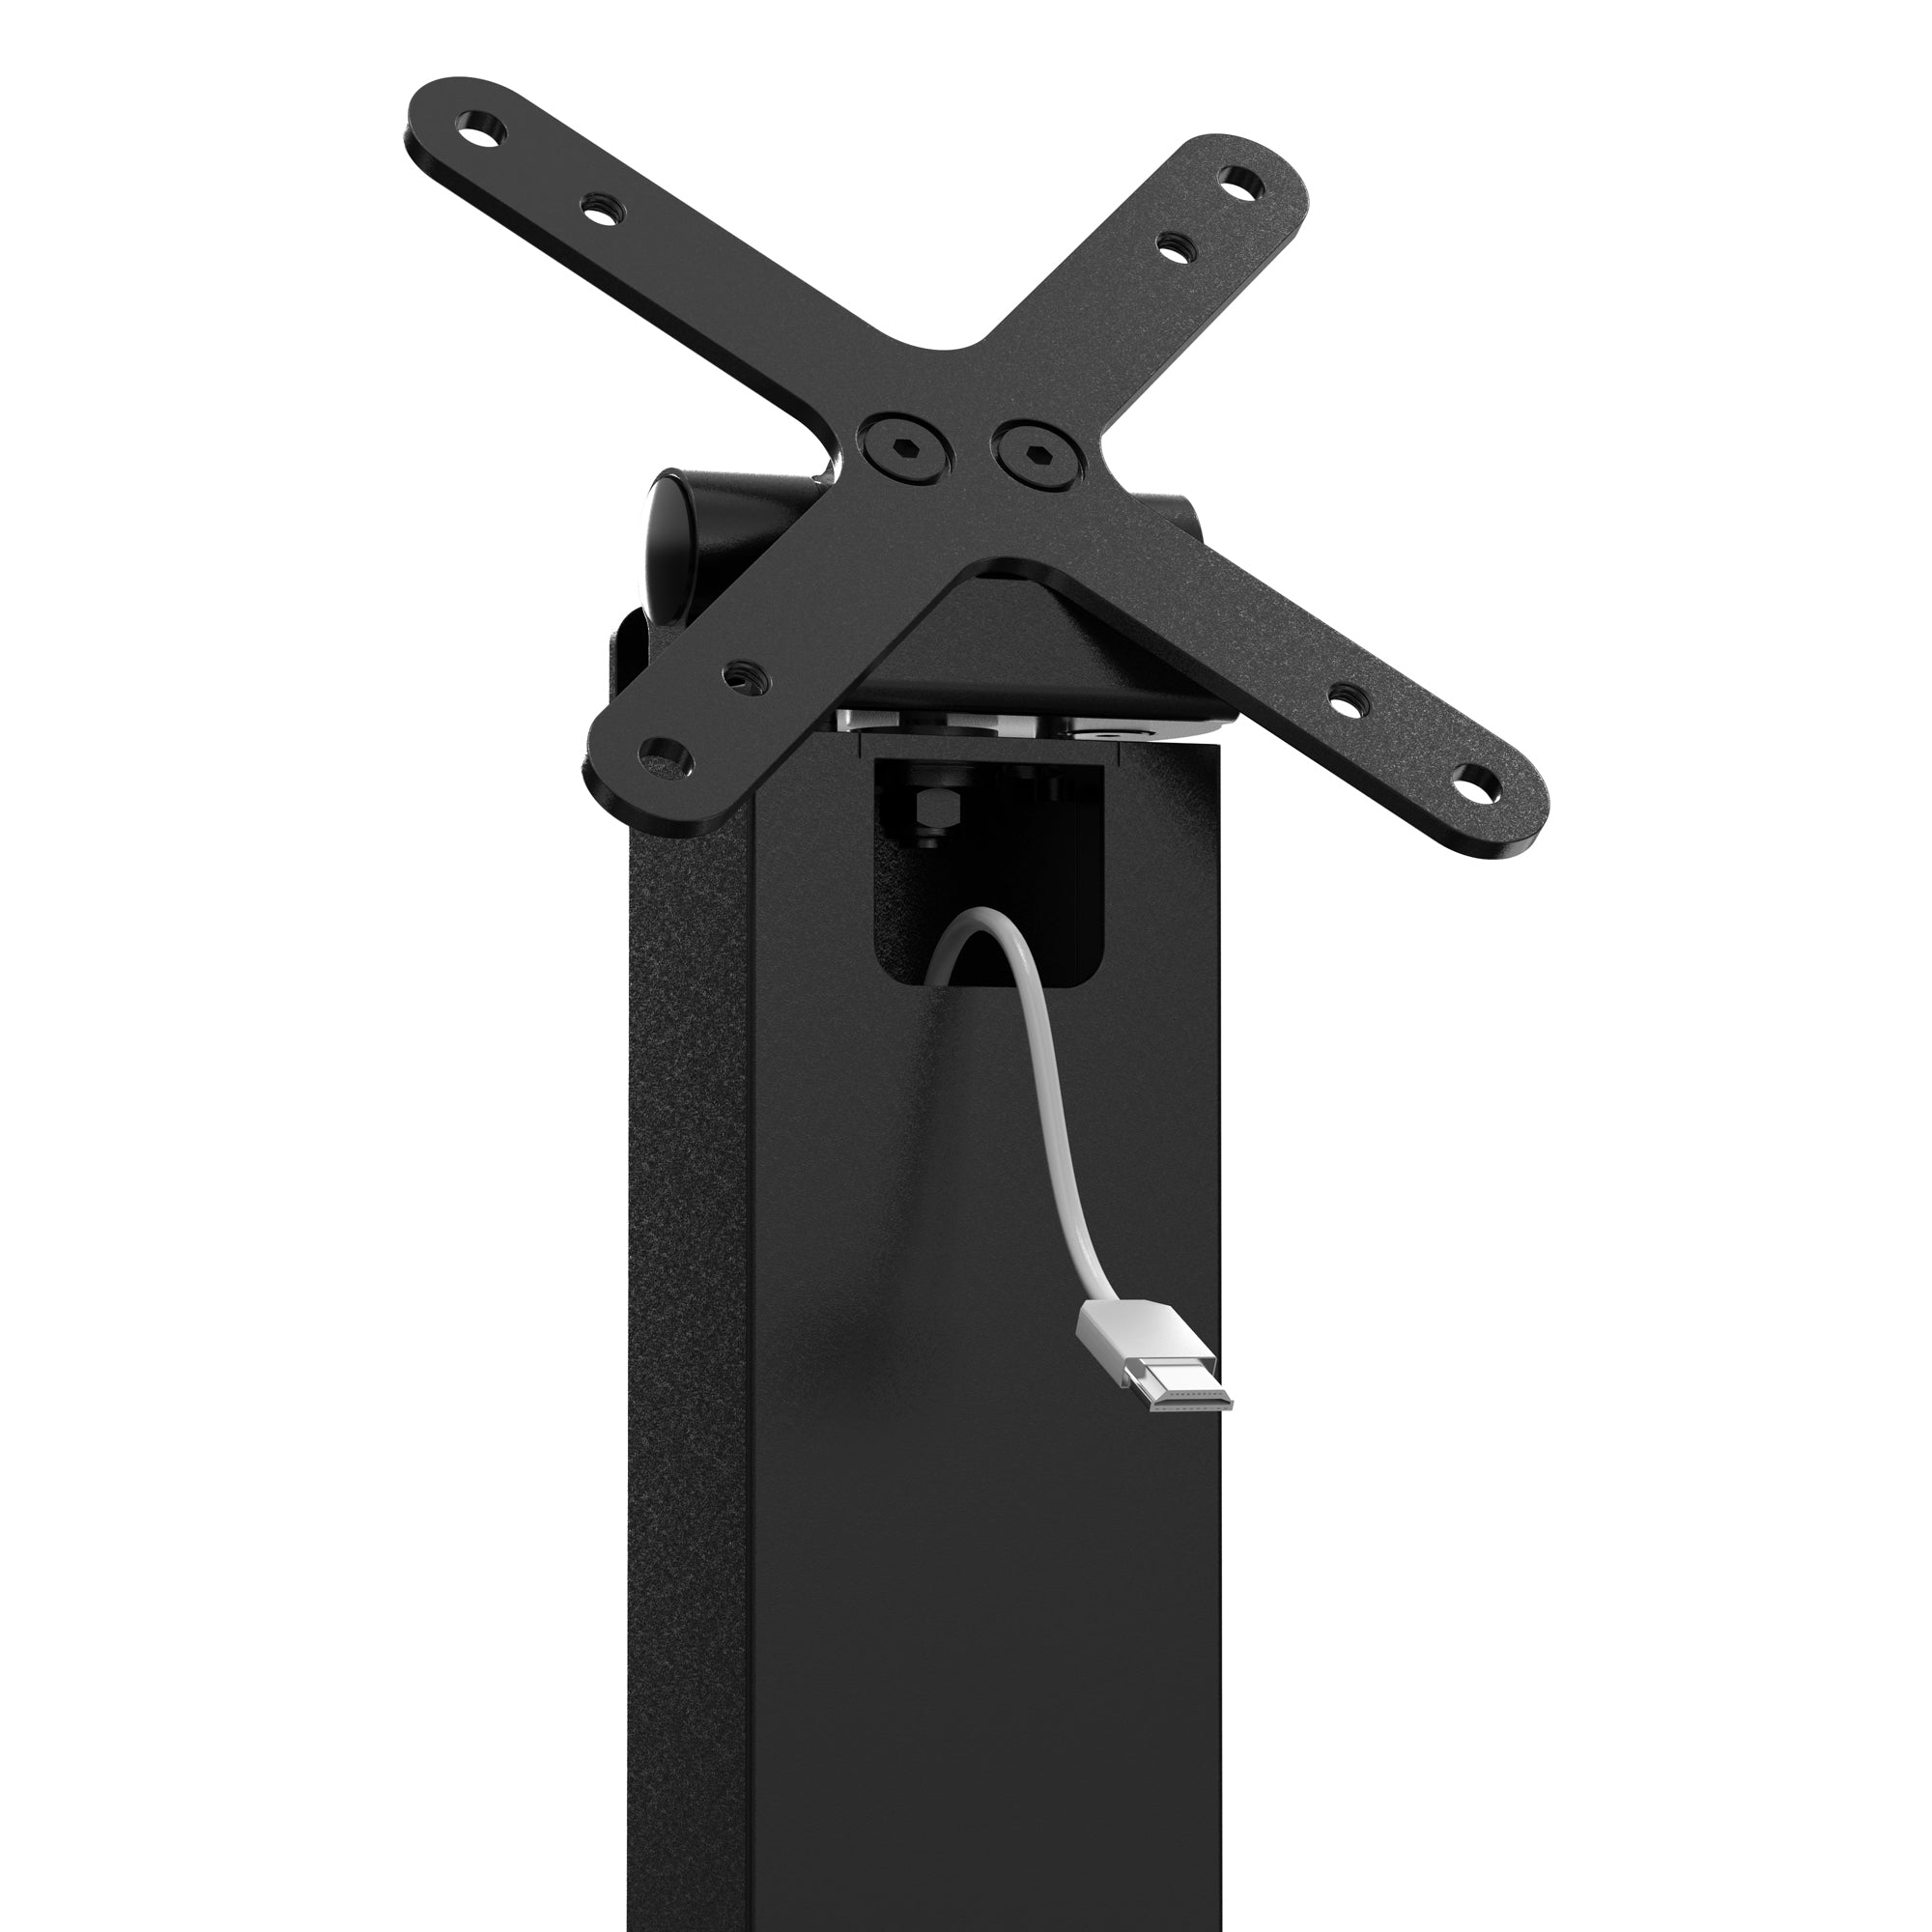 Rotating Sleek Desk Mount for Tablets and Displays up to 11lbs.